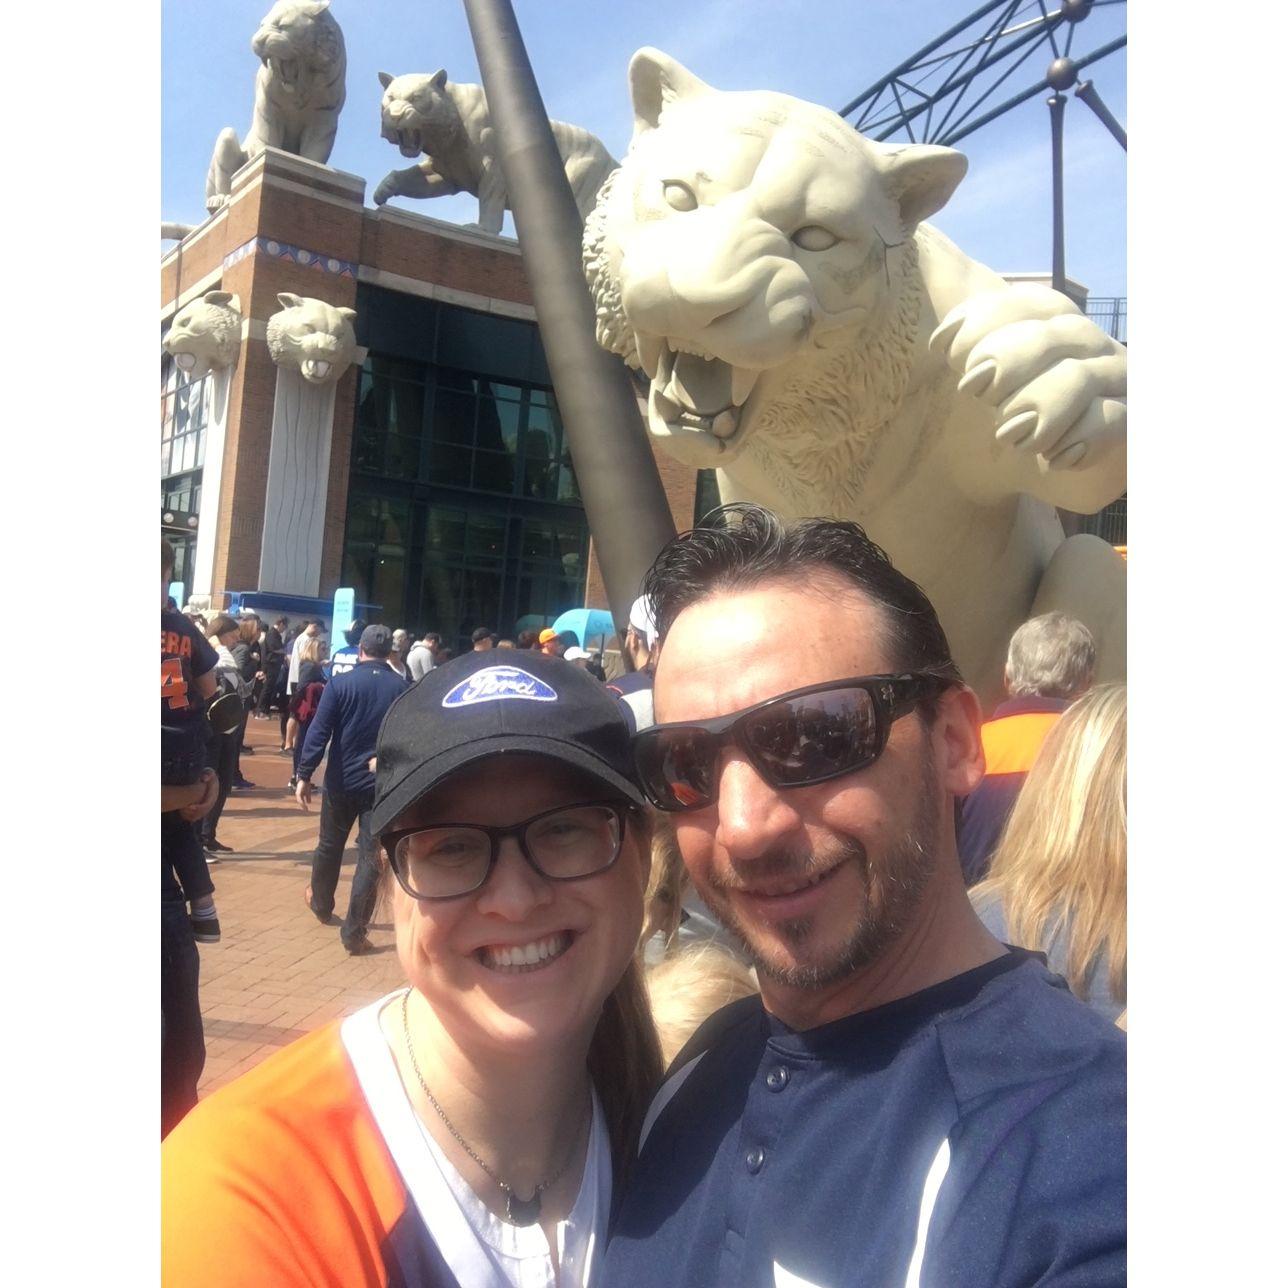 Hot day at Comerica Park taking in some Detoit Tiger baseball